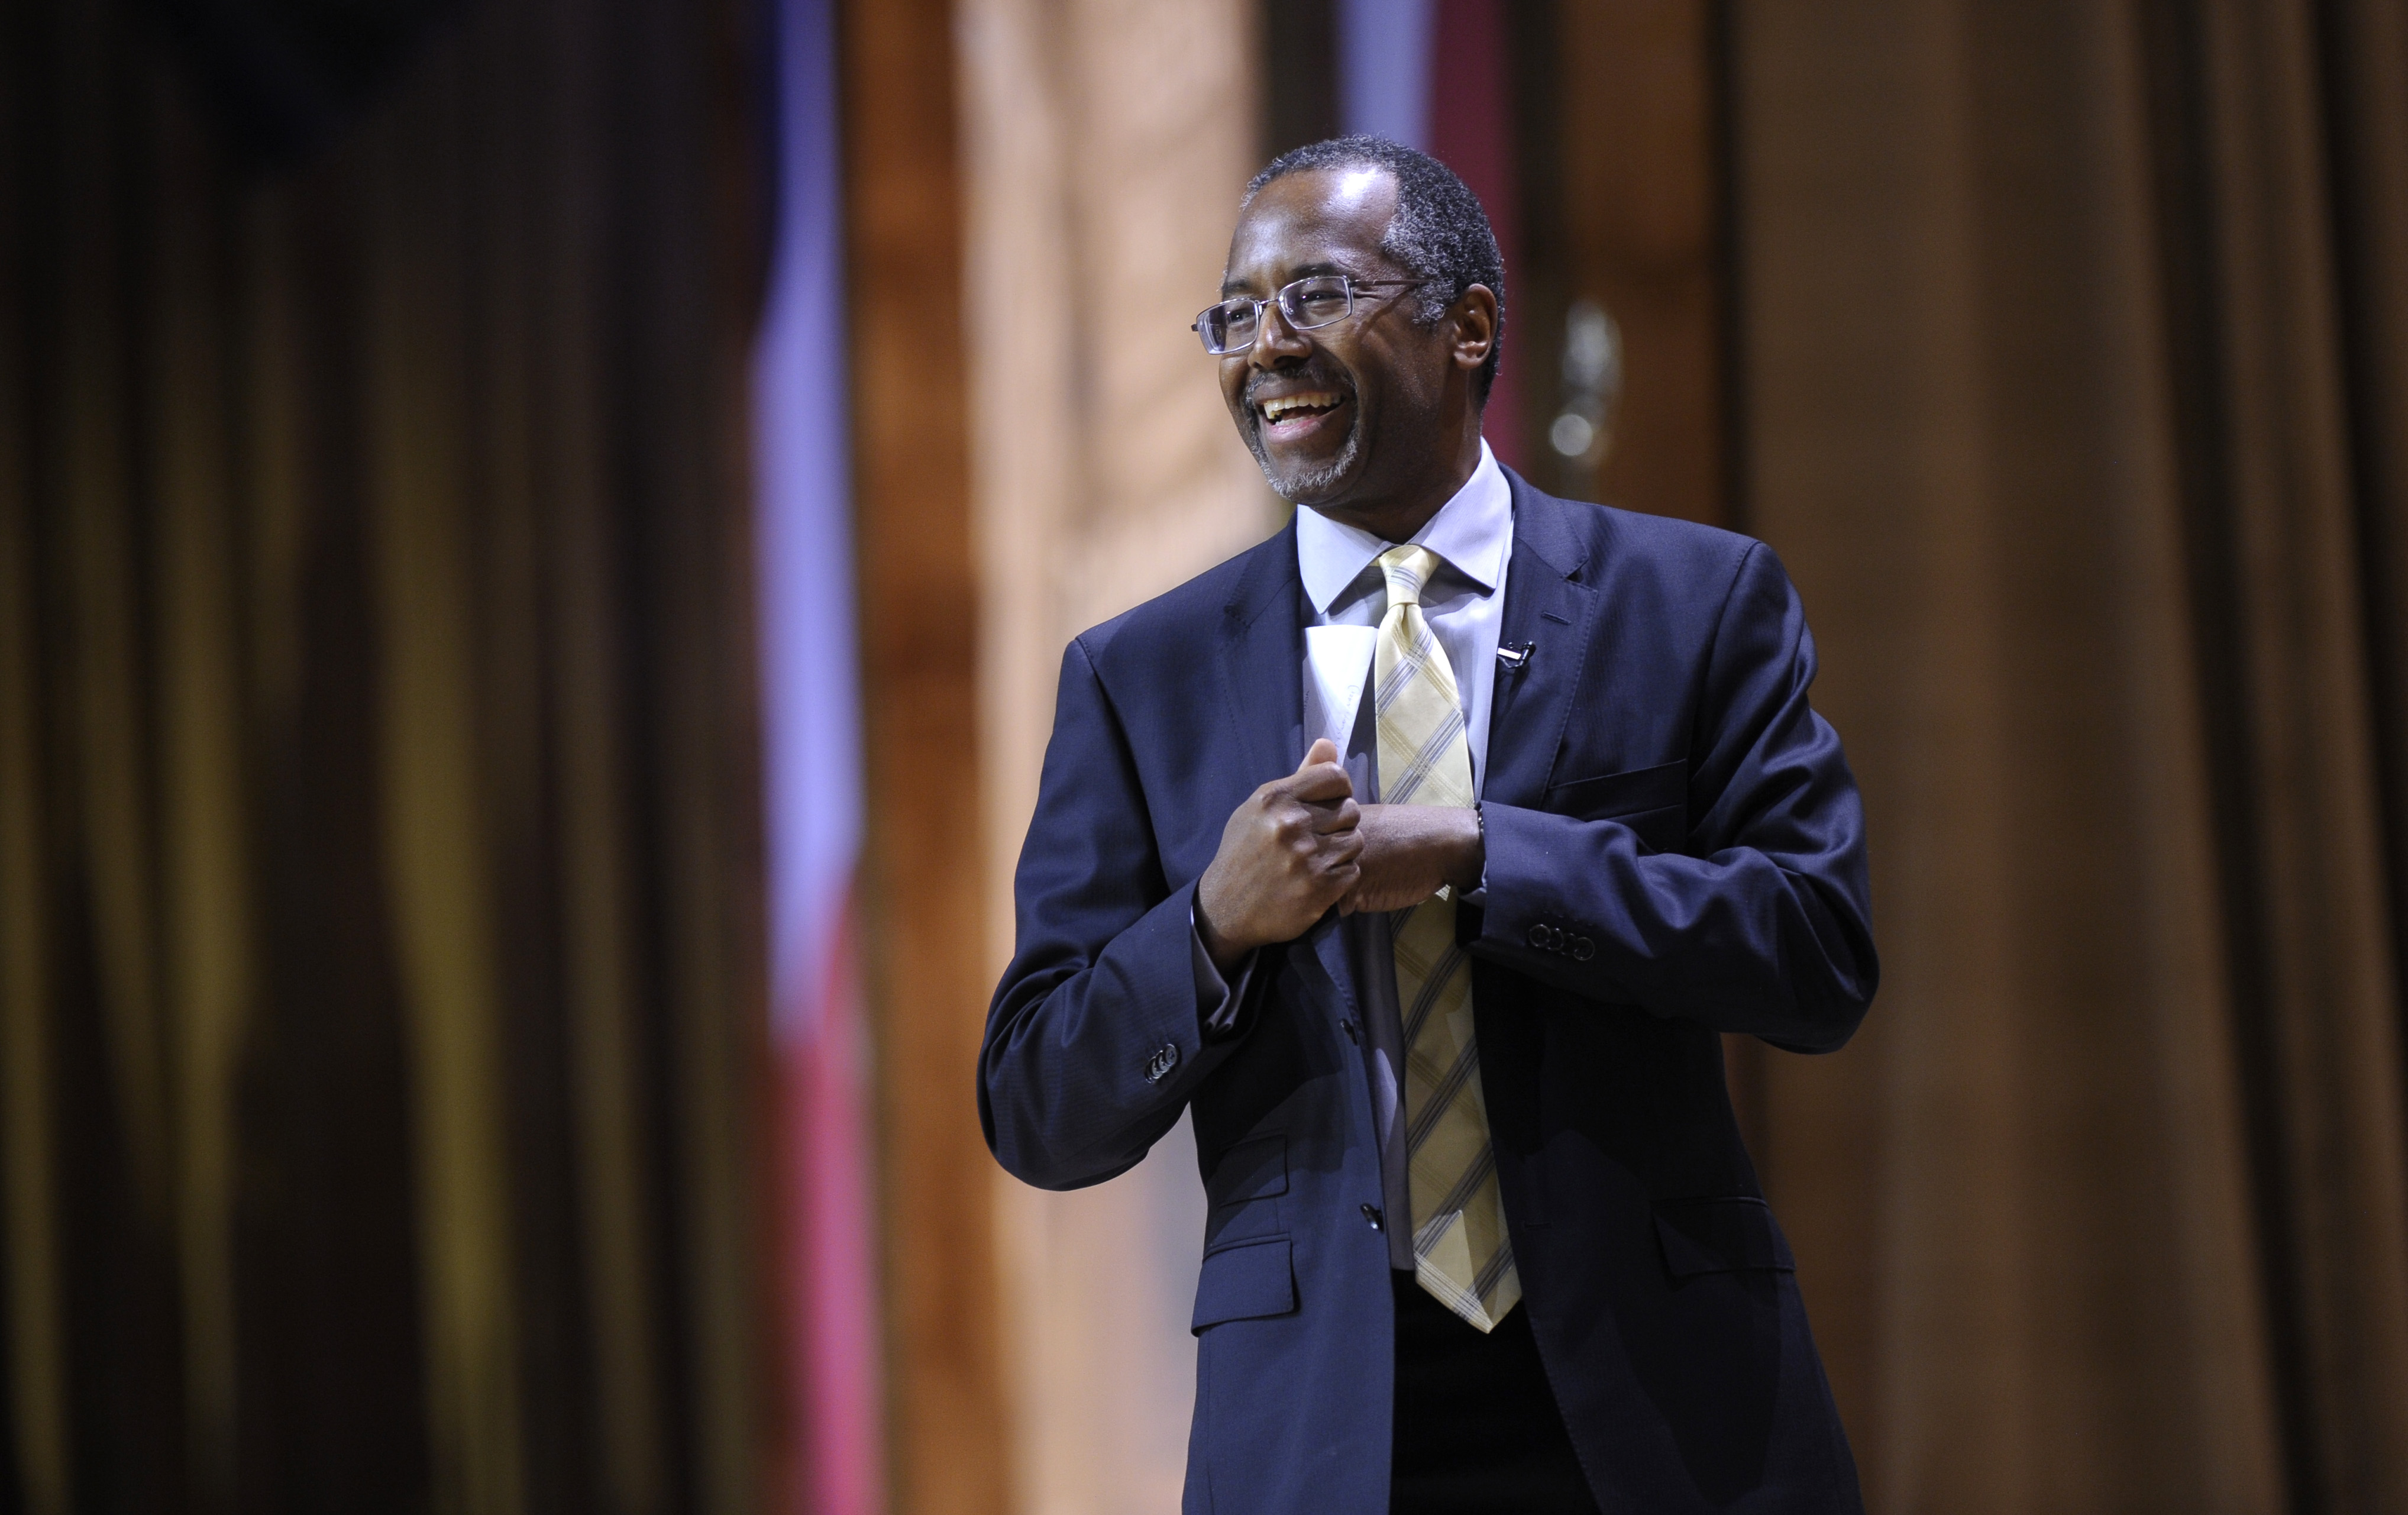 Dr. Ben Carson, professor emeritus at Johns Hopkins School of Medicine, speaks at the Conservative Political Action Conference annual meeting in National Harbor, Md., on March 8, 2014. (Susan Walsh—AP)